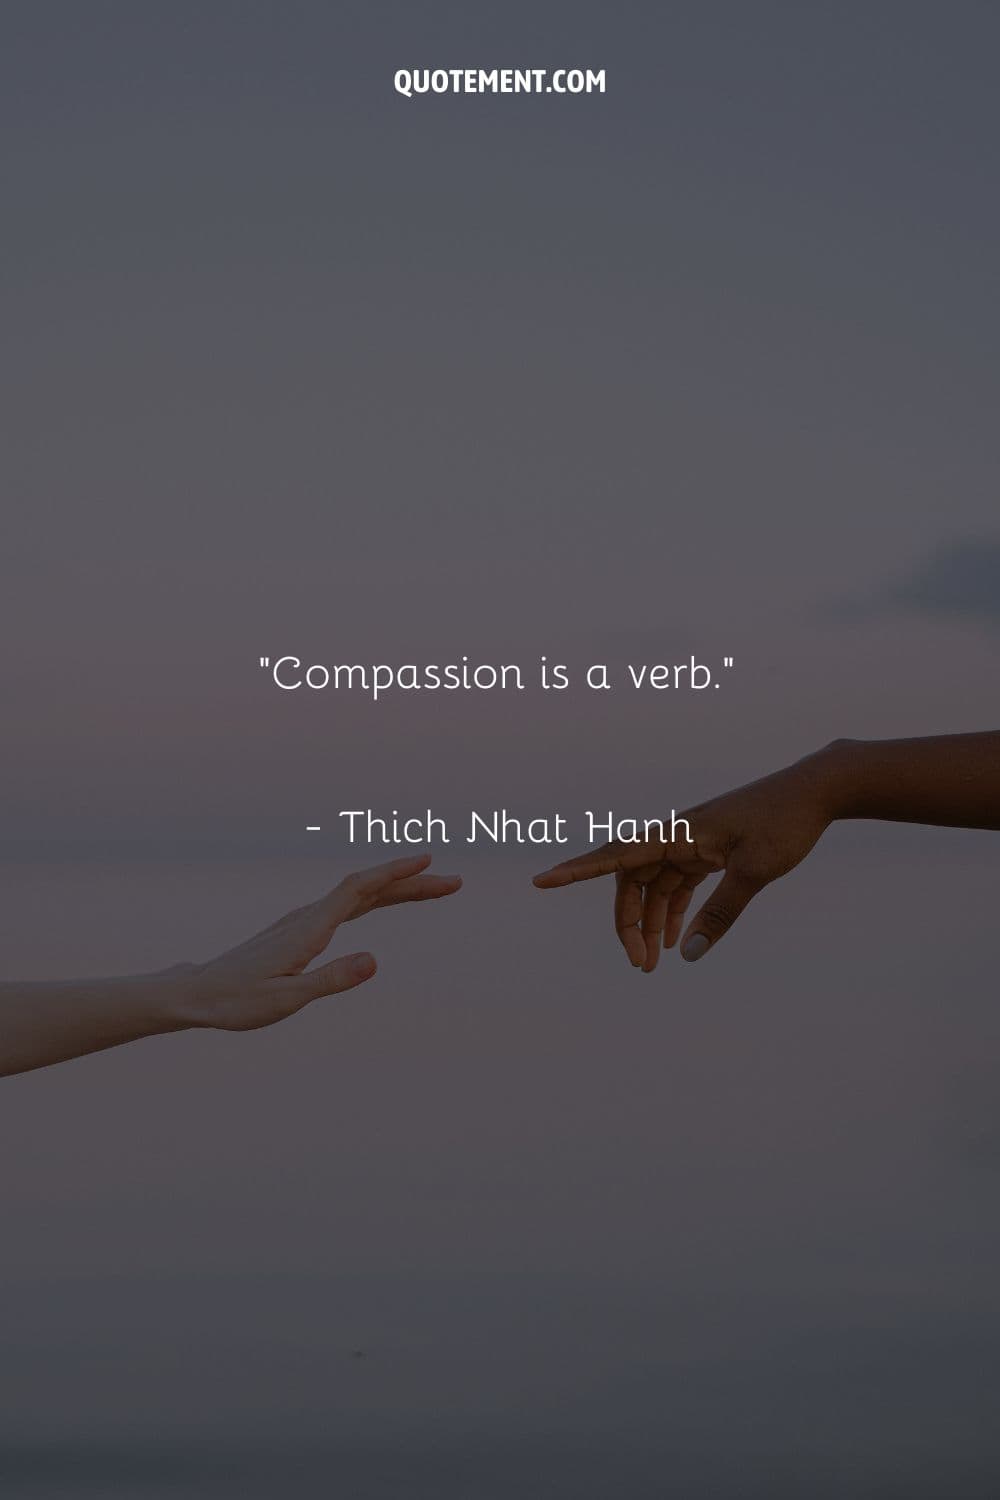 Compassion is a verb